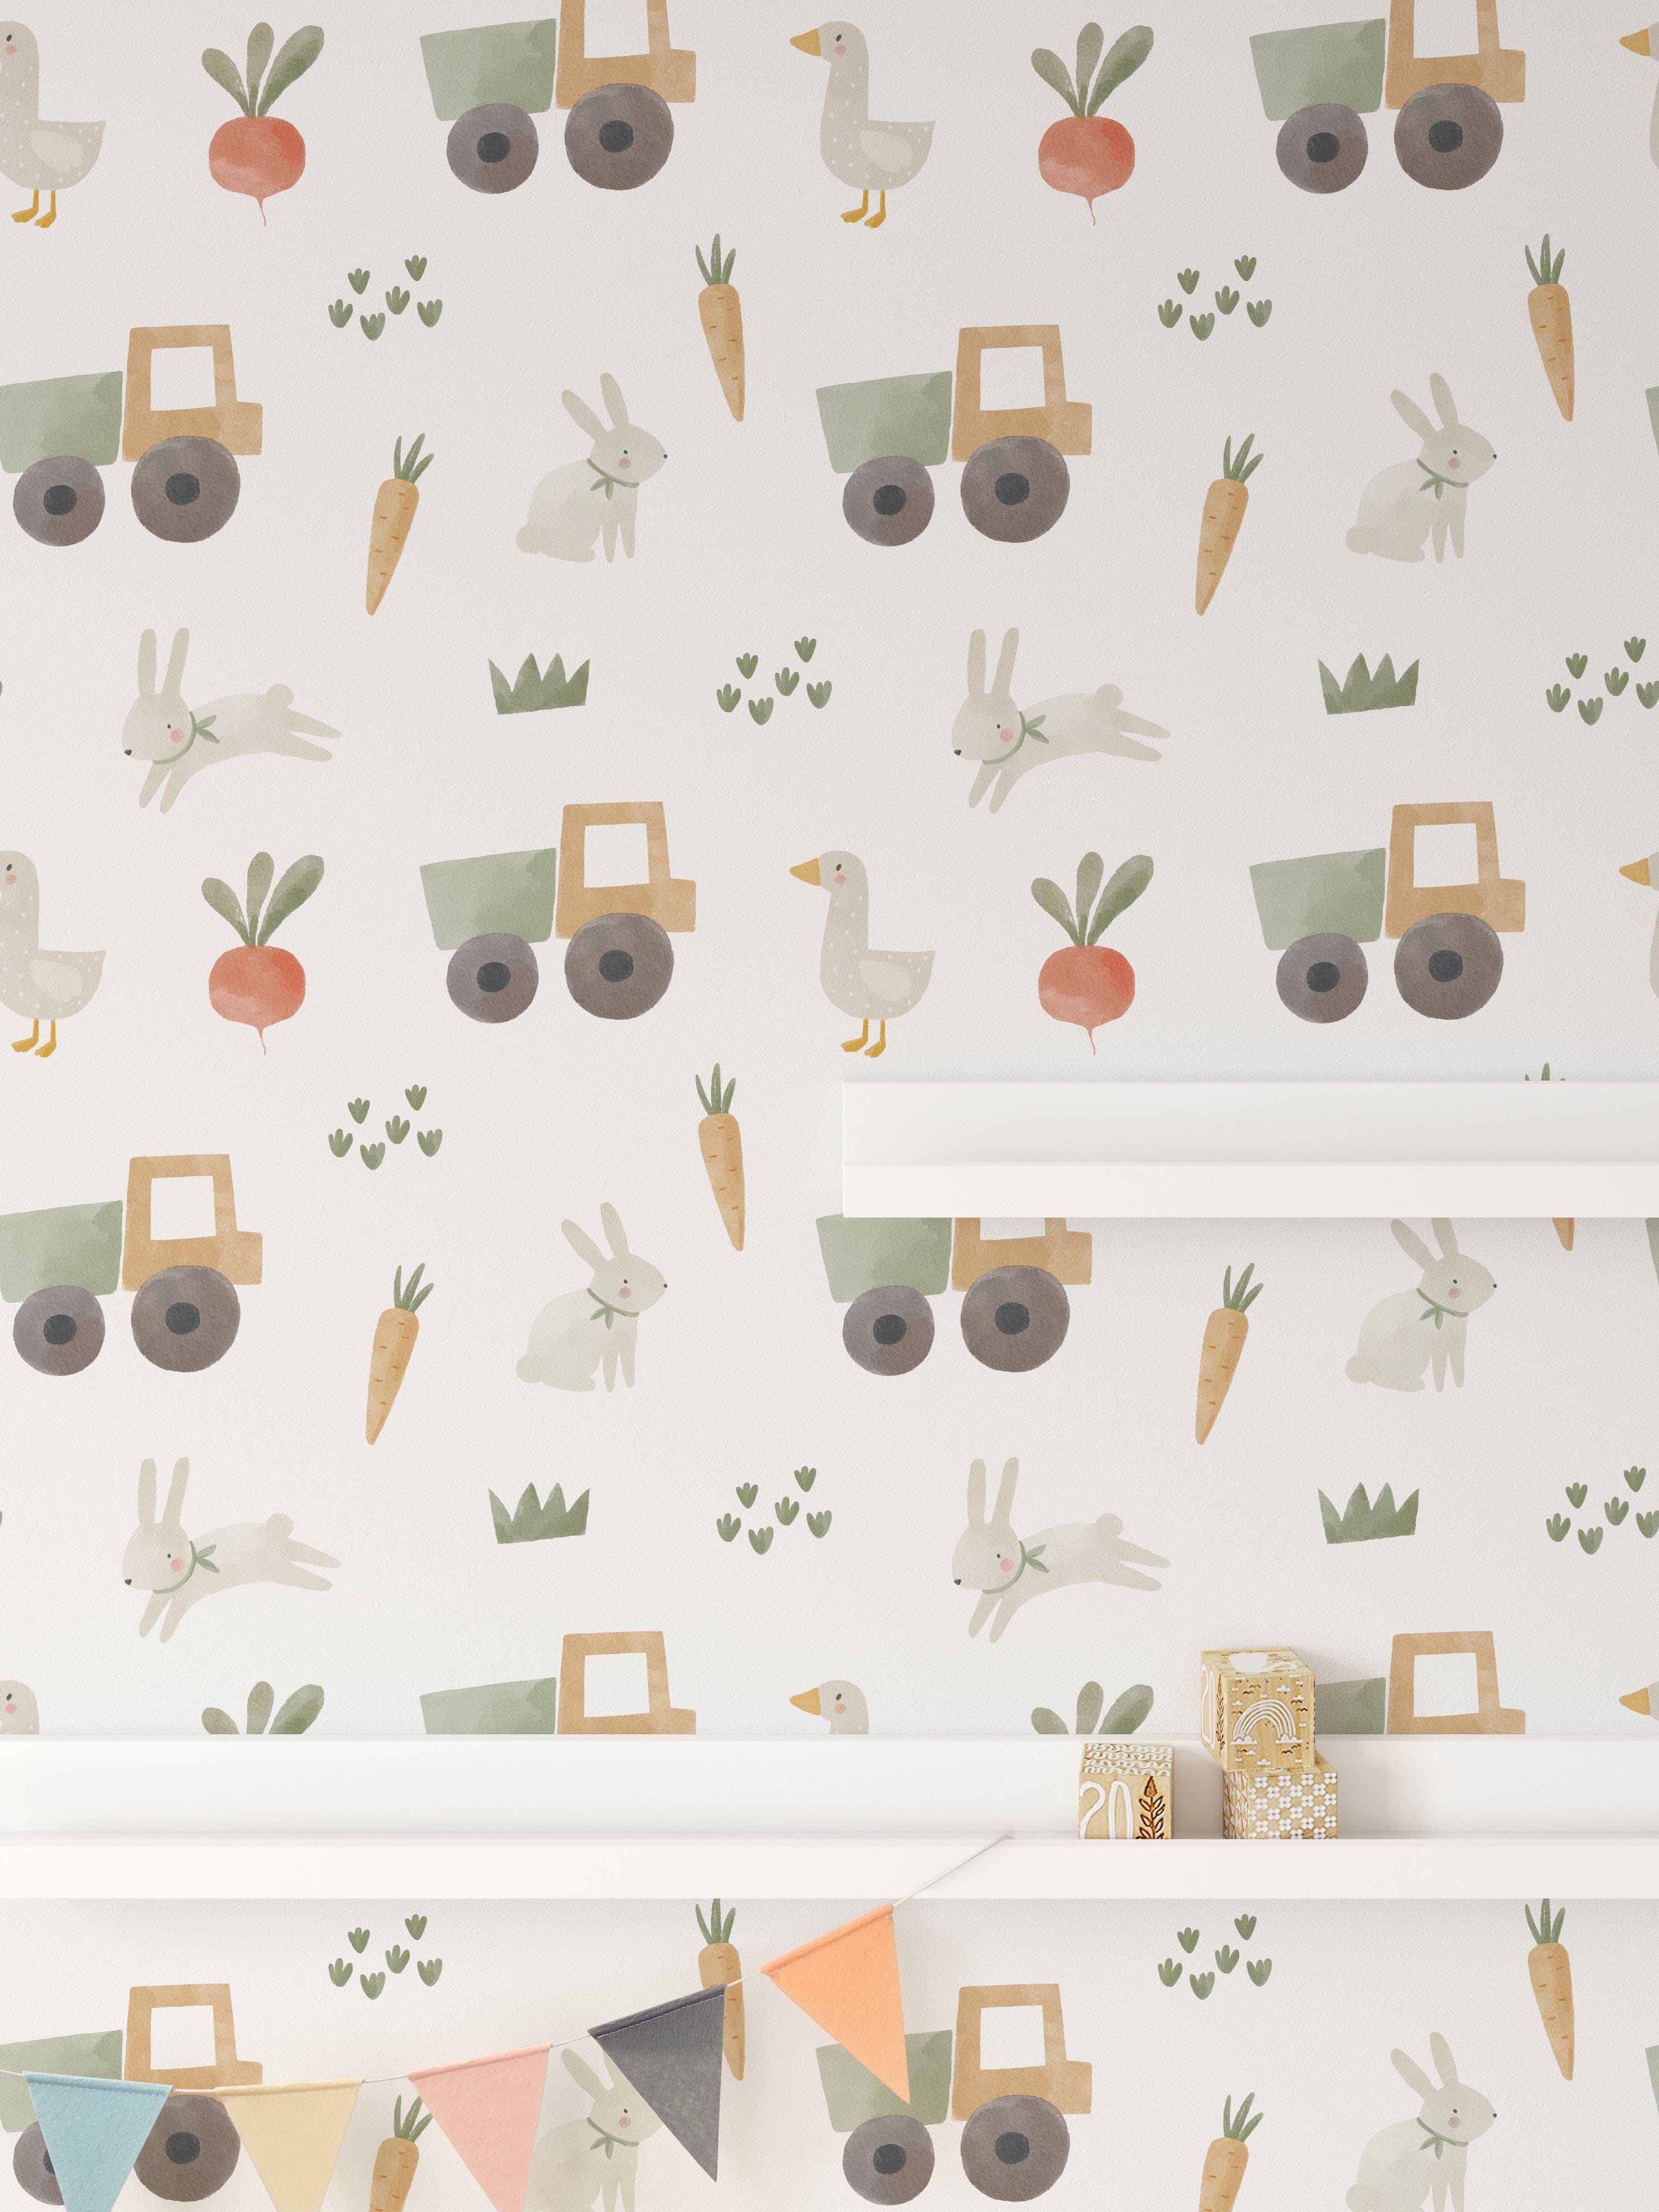 A child's room decorated with Farm Friend Wallpaper - Bunnies and Gosling, showcasing charming illustrations of bunnies, geese, tractors, carrots, radishes, and grass, creating a playful and whimsical atmosphere.